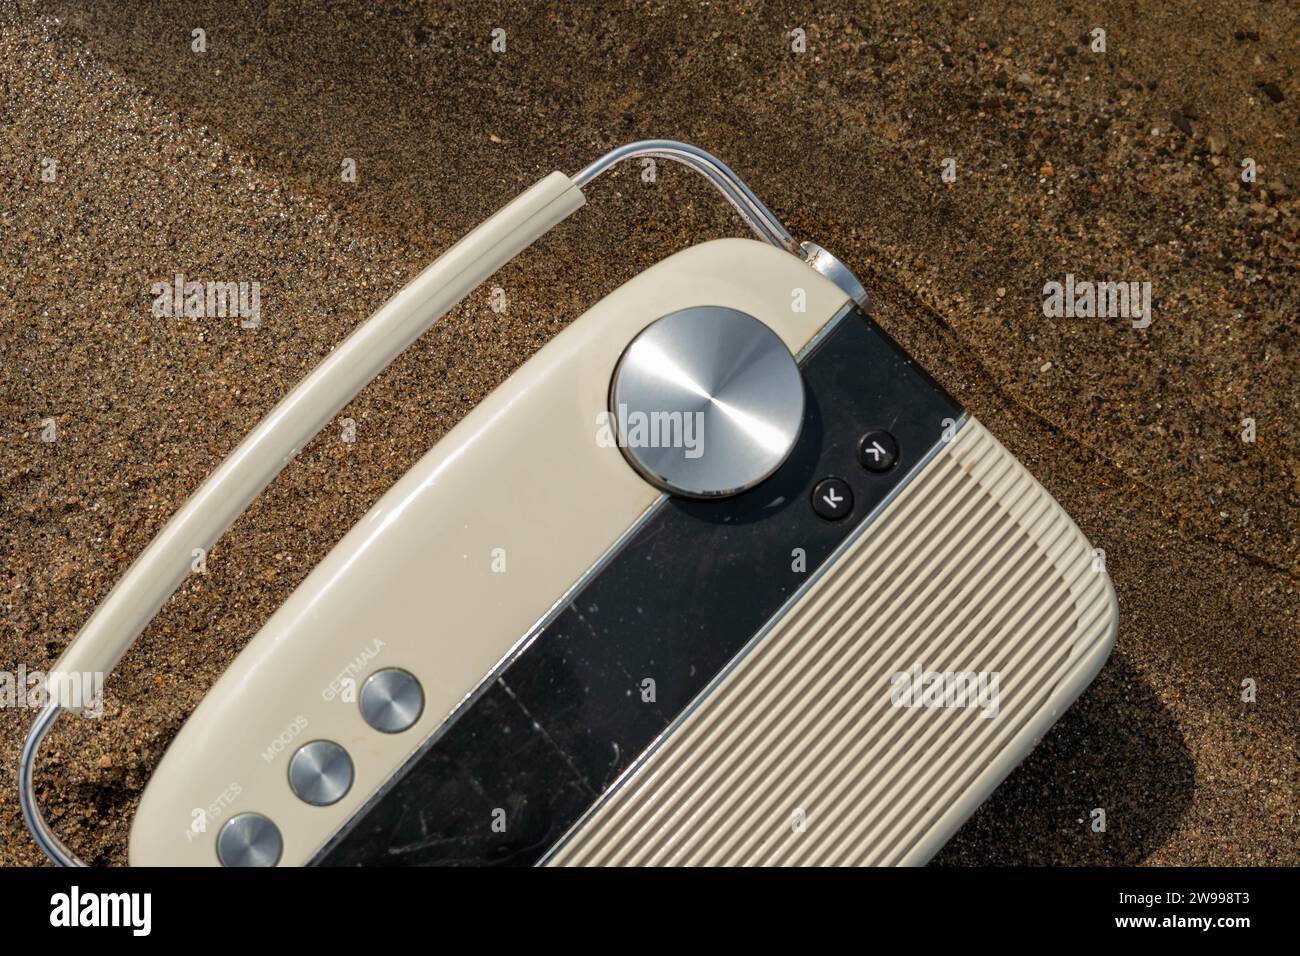 A white, vintage-style radio sitting atop a wooden floor surrounded by a black and white checkered pattern Stock Photo